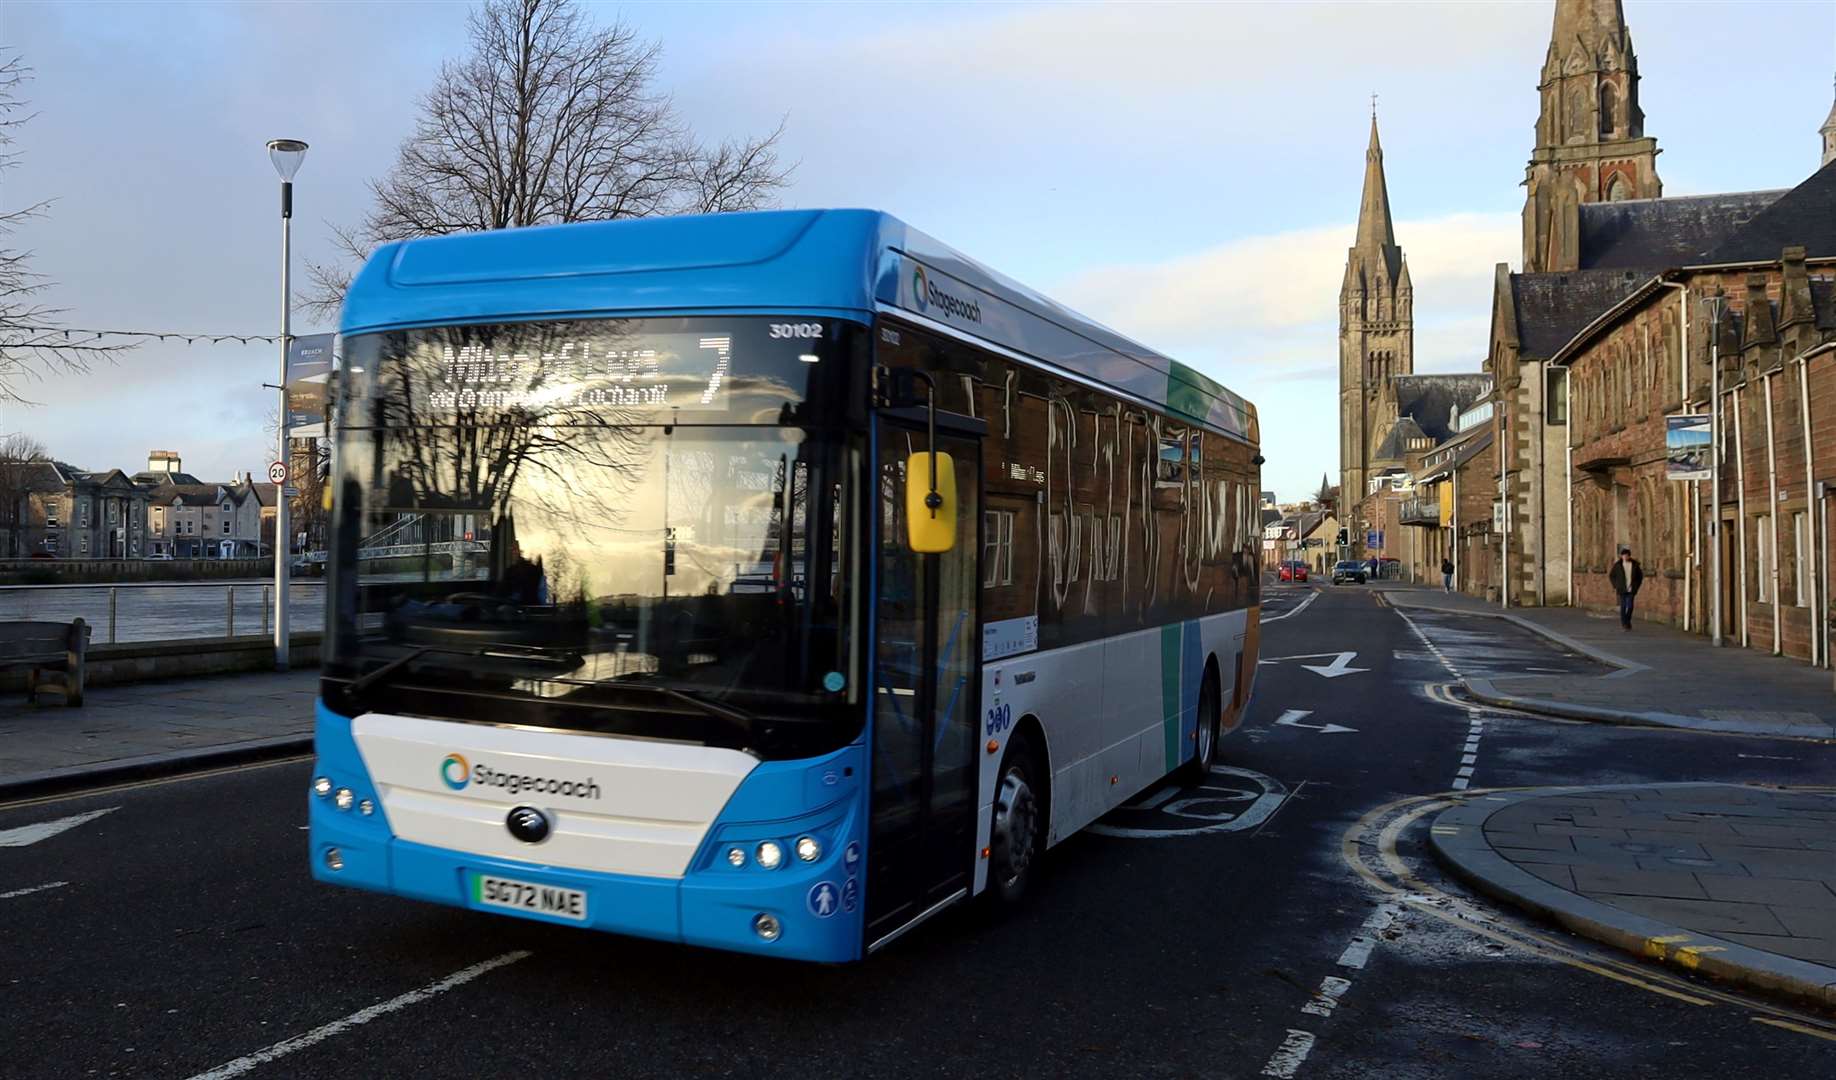 A Stagecoach bus in Inverness.